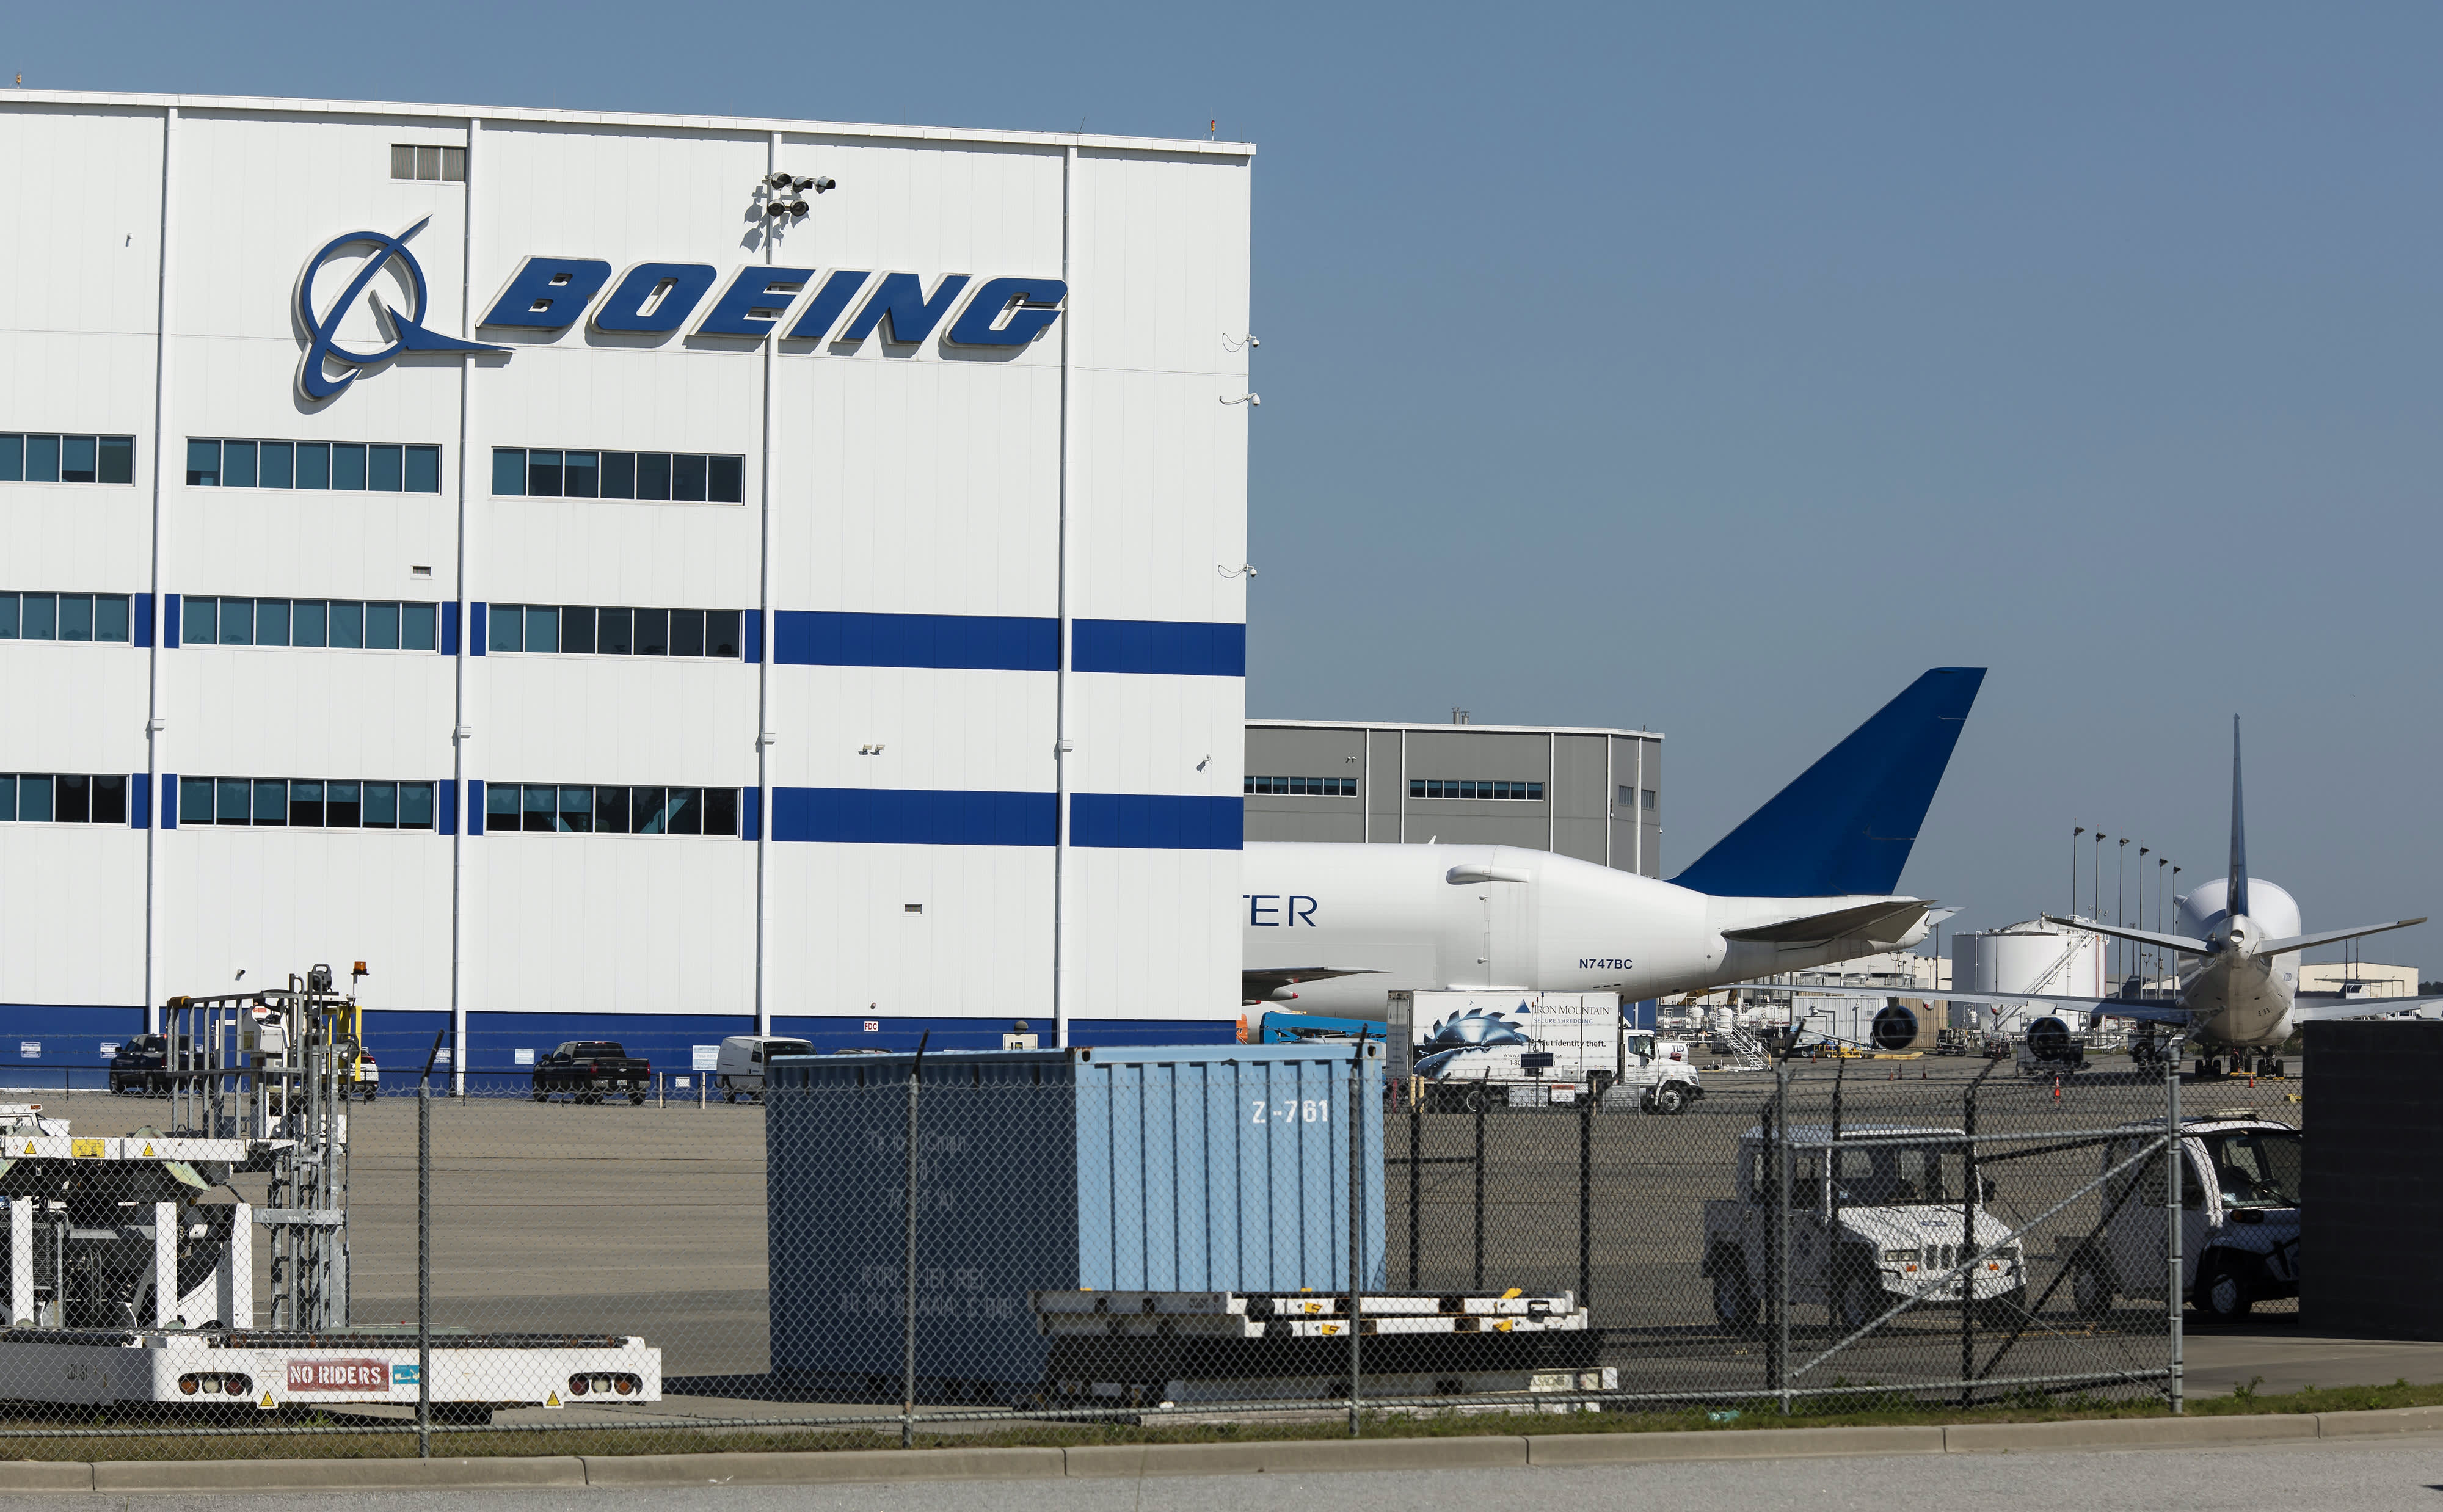 Boeing to consolidate production of Dreamliner in South Carolina as demand drops